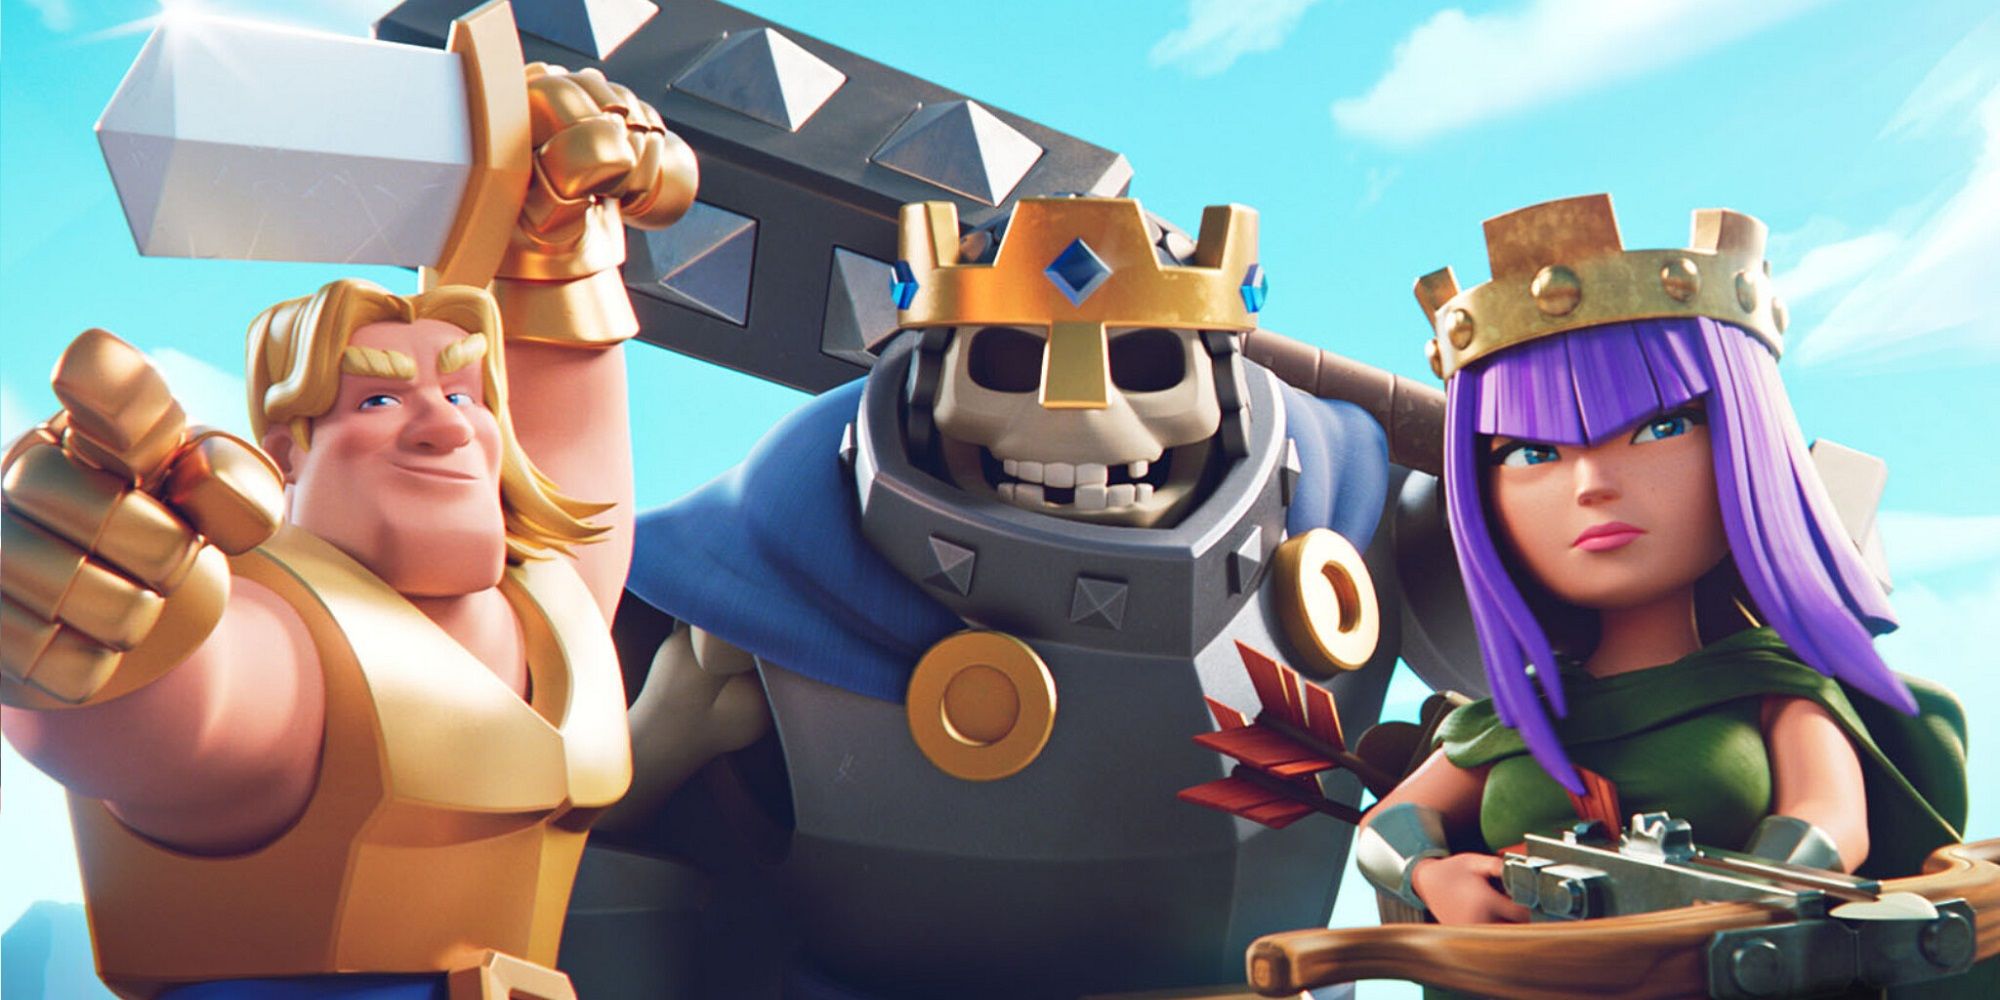 Top 3 Clash Royale decks for beginners (October 2023)